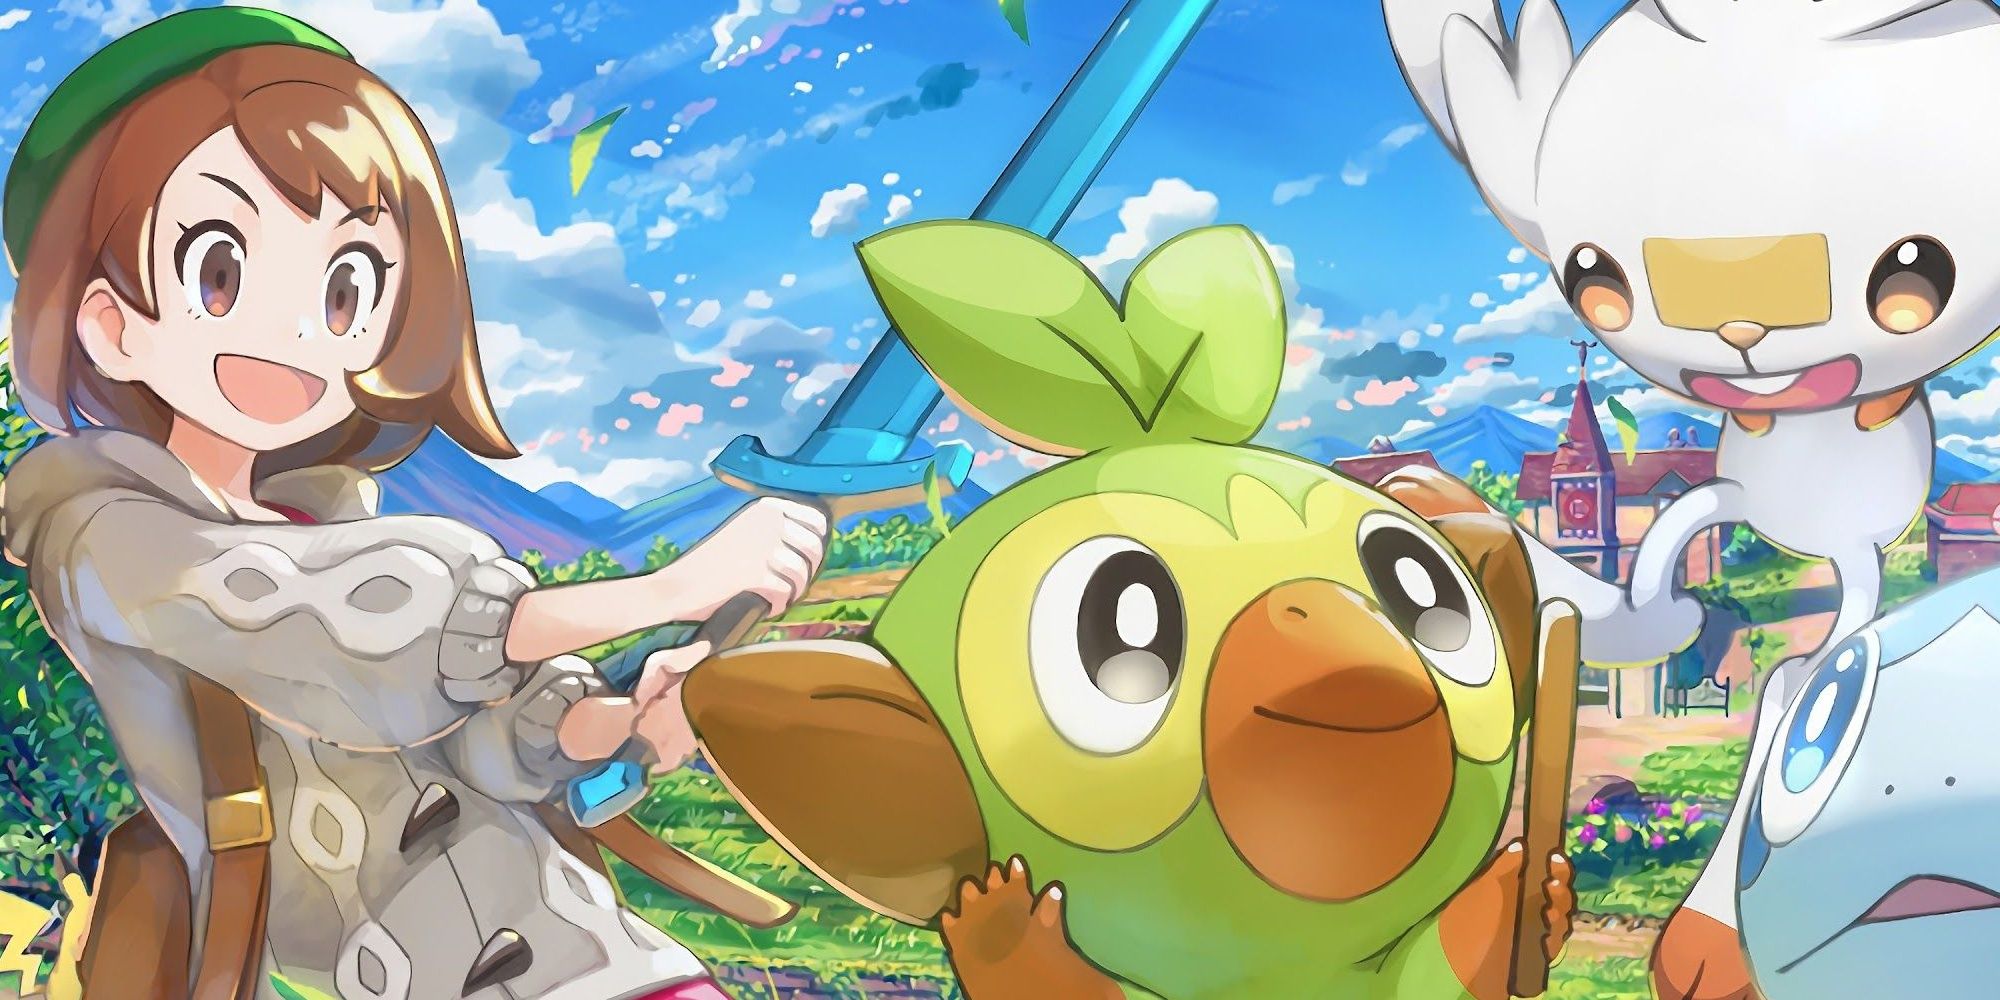 Pokemon Sword & Shield female protagonist holding a sword and smiling with Grookey, Sobble, and Scorbunny